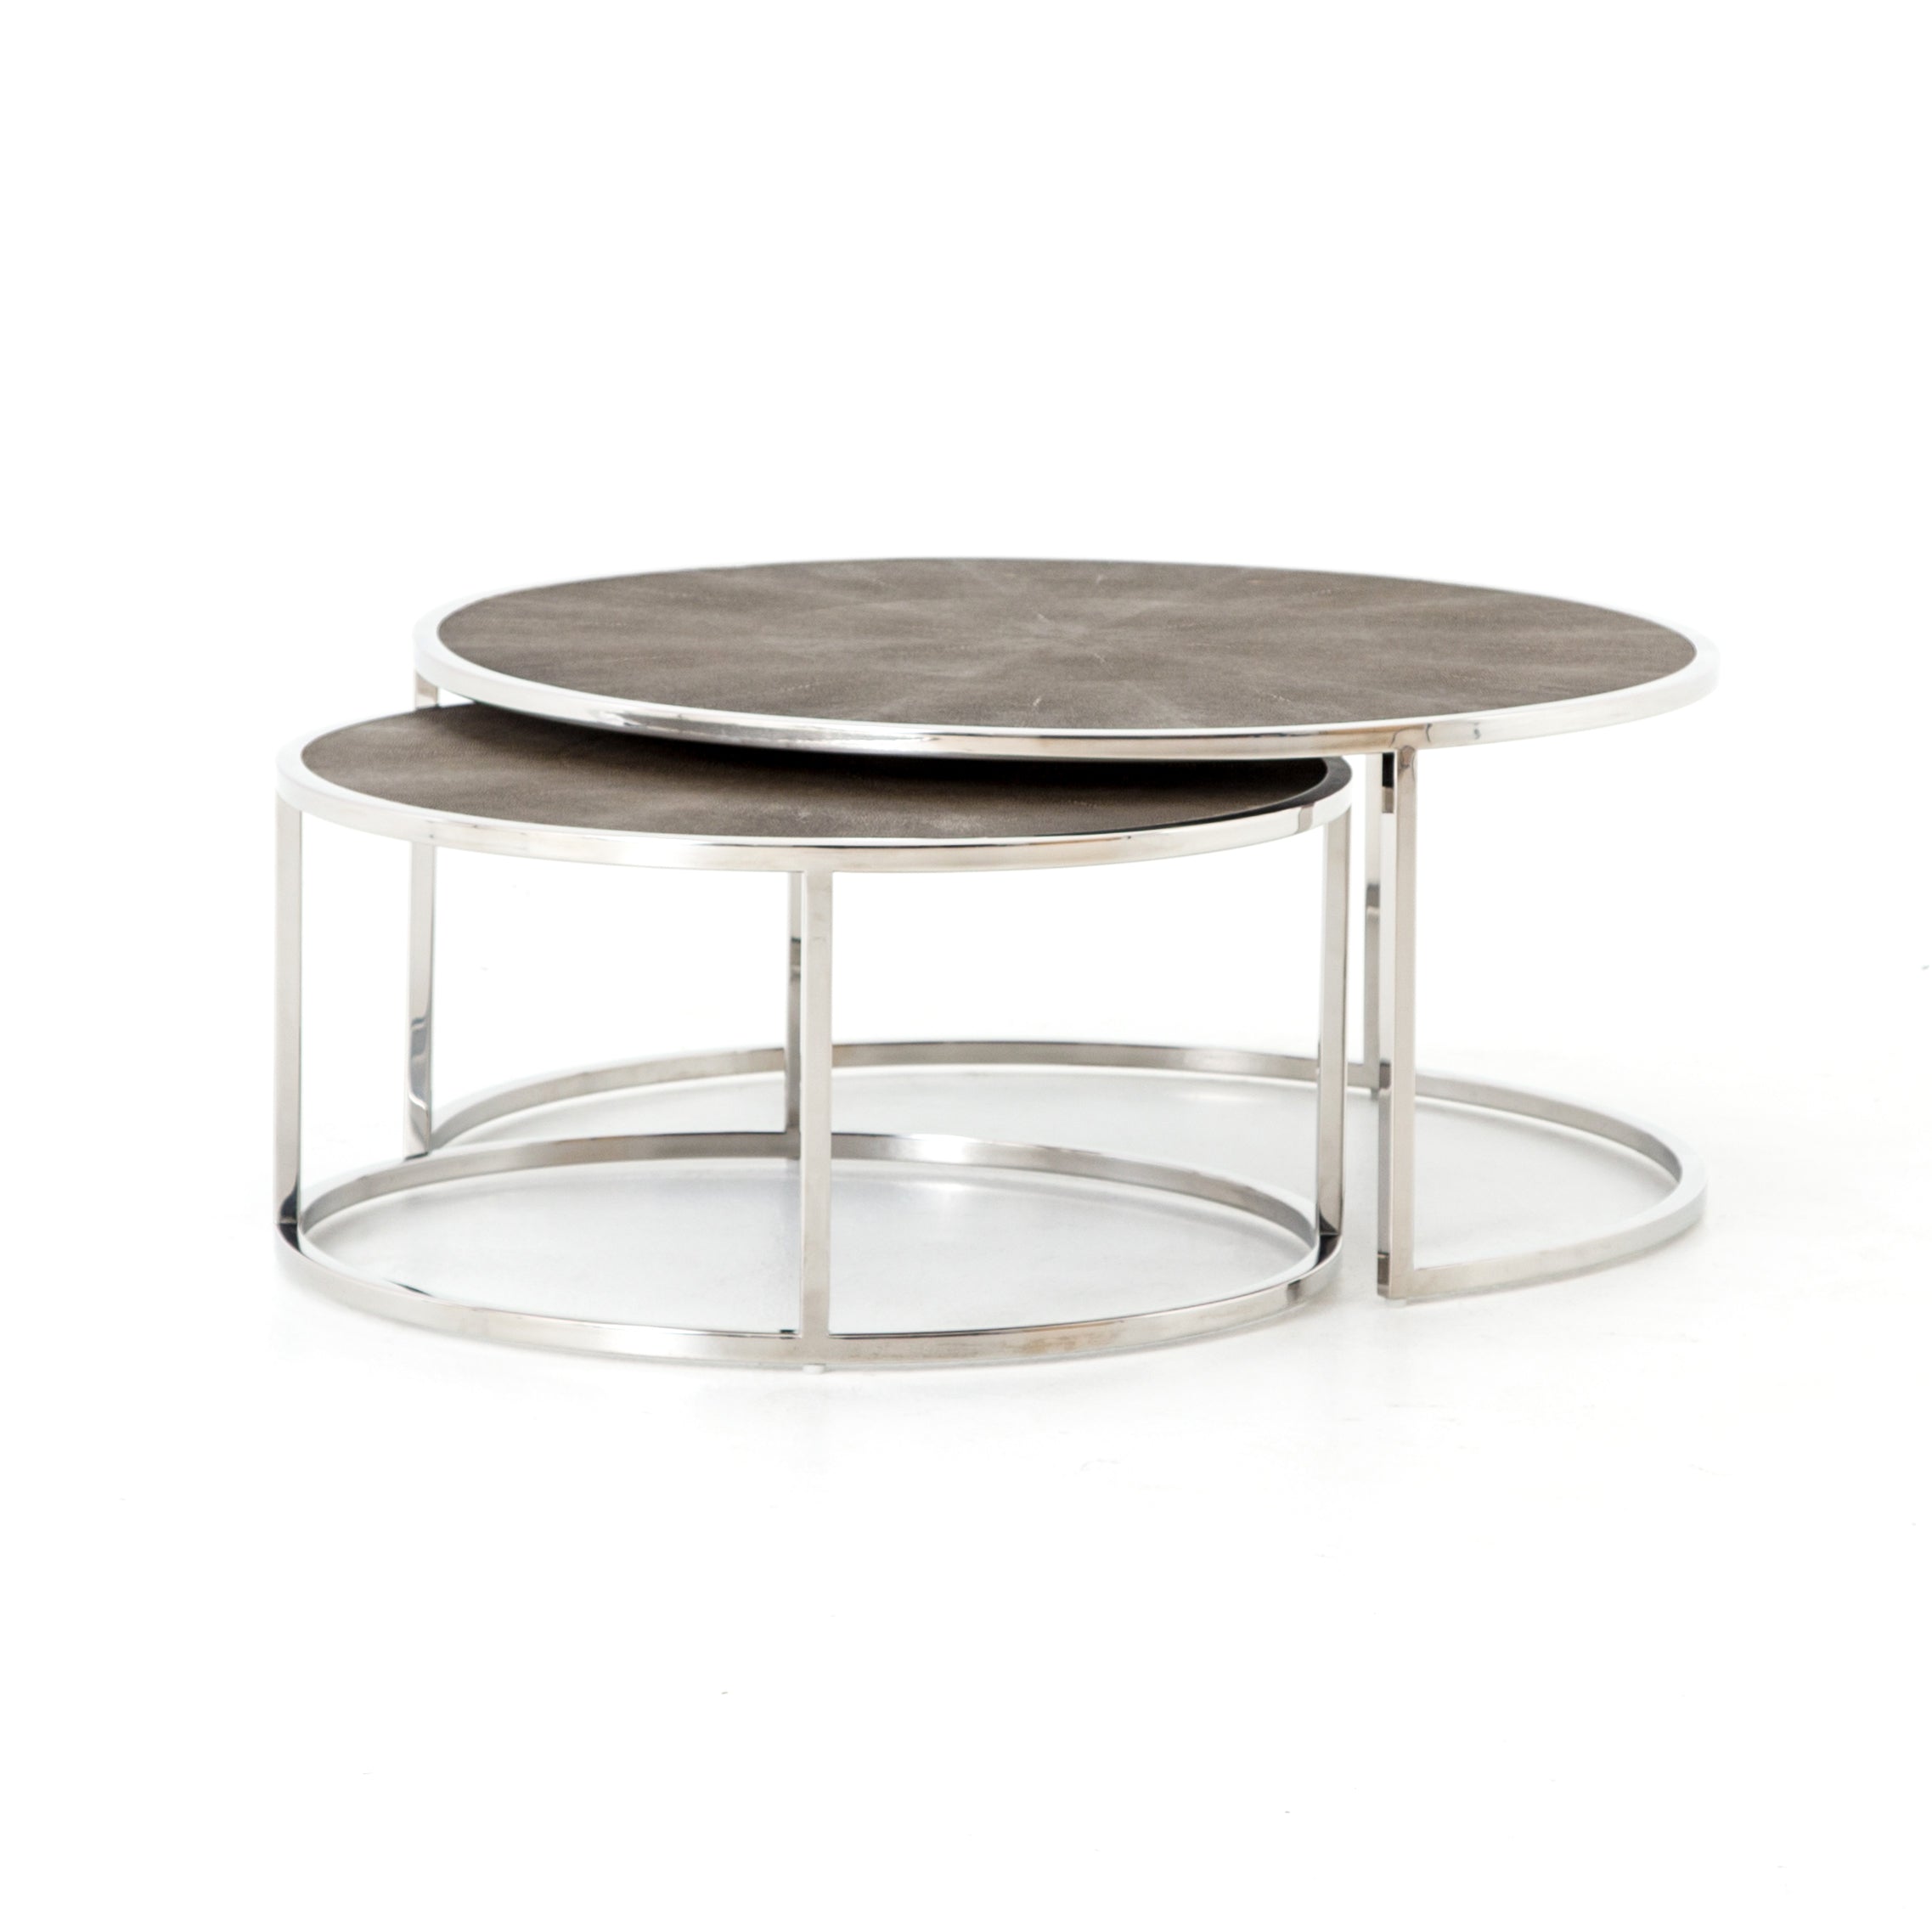 CHEVY NESTING COFFEE TABLE